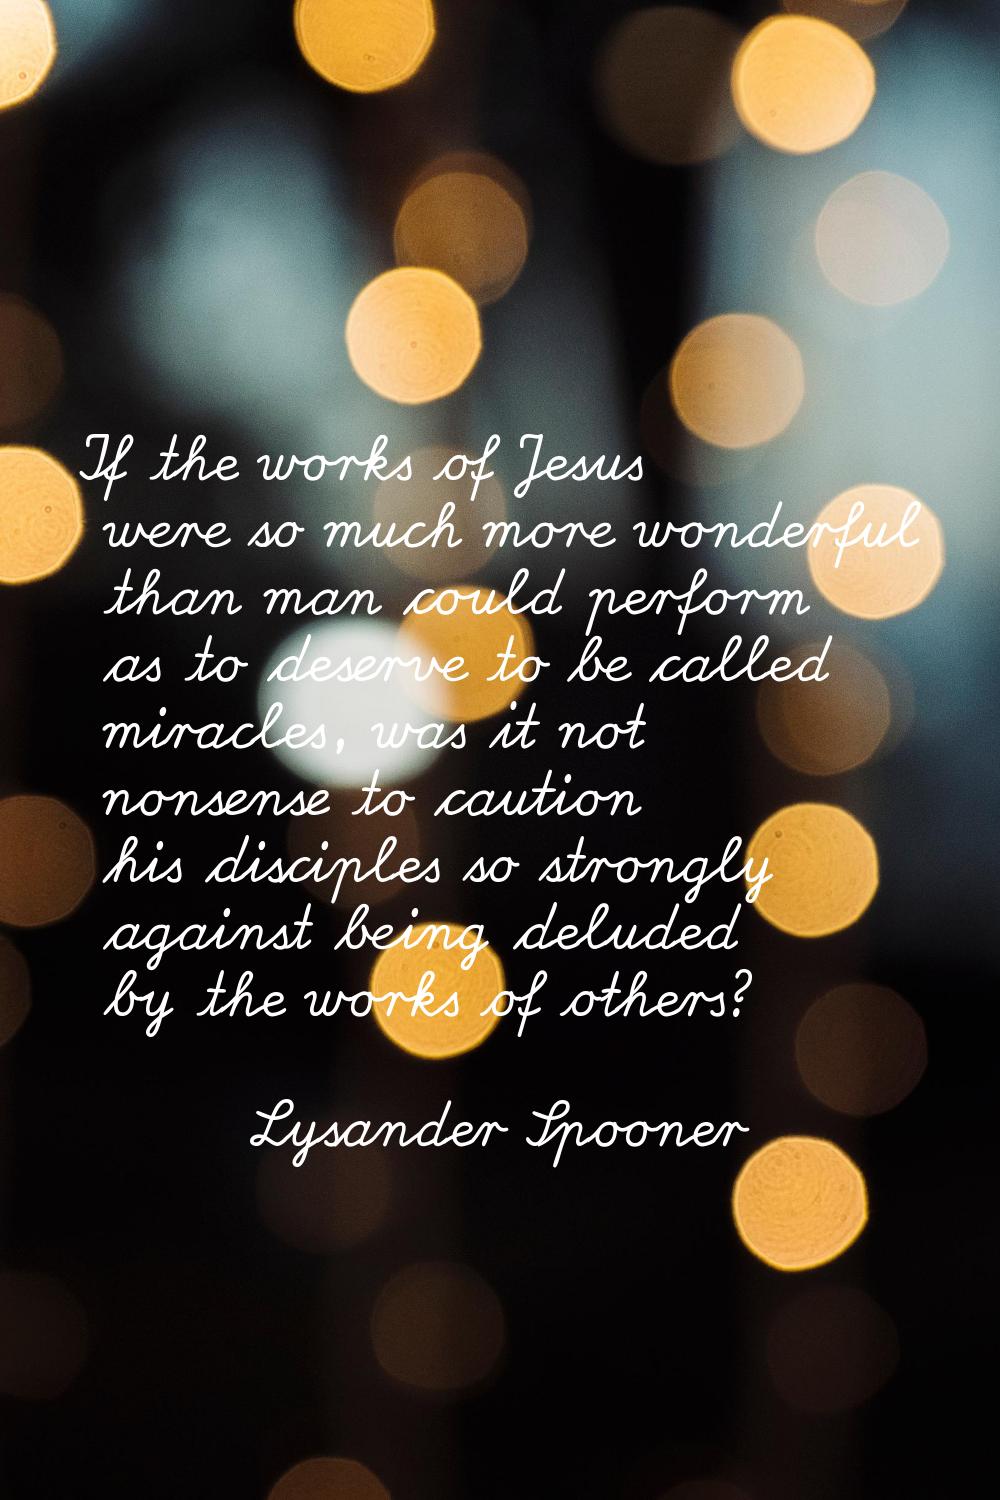 If the works of Jesus were so much more wonderful than man could perform as to deserve to be called